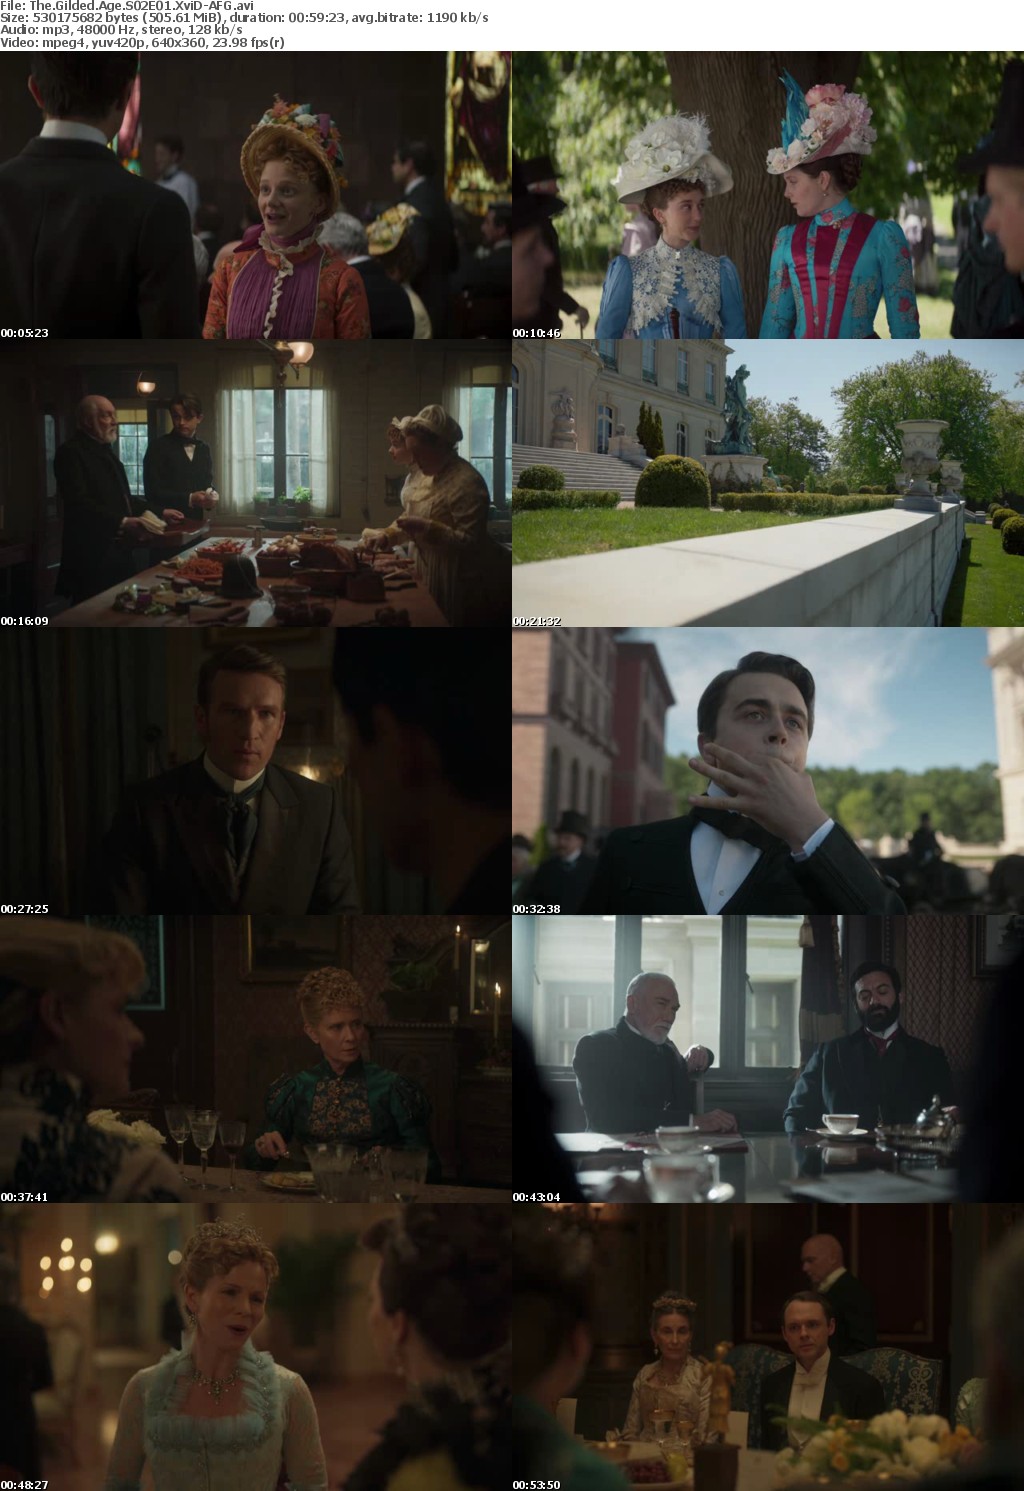 The Gilded Age S02E01 XviD-AFG